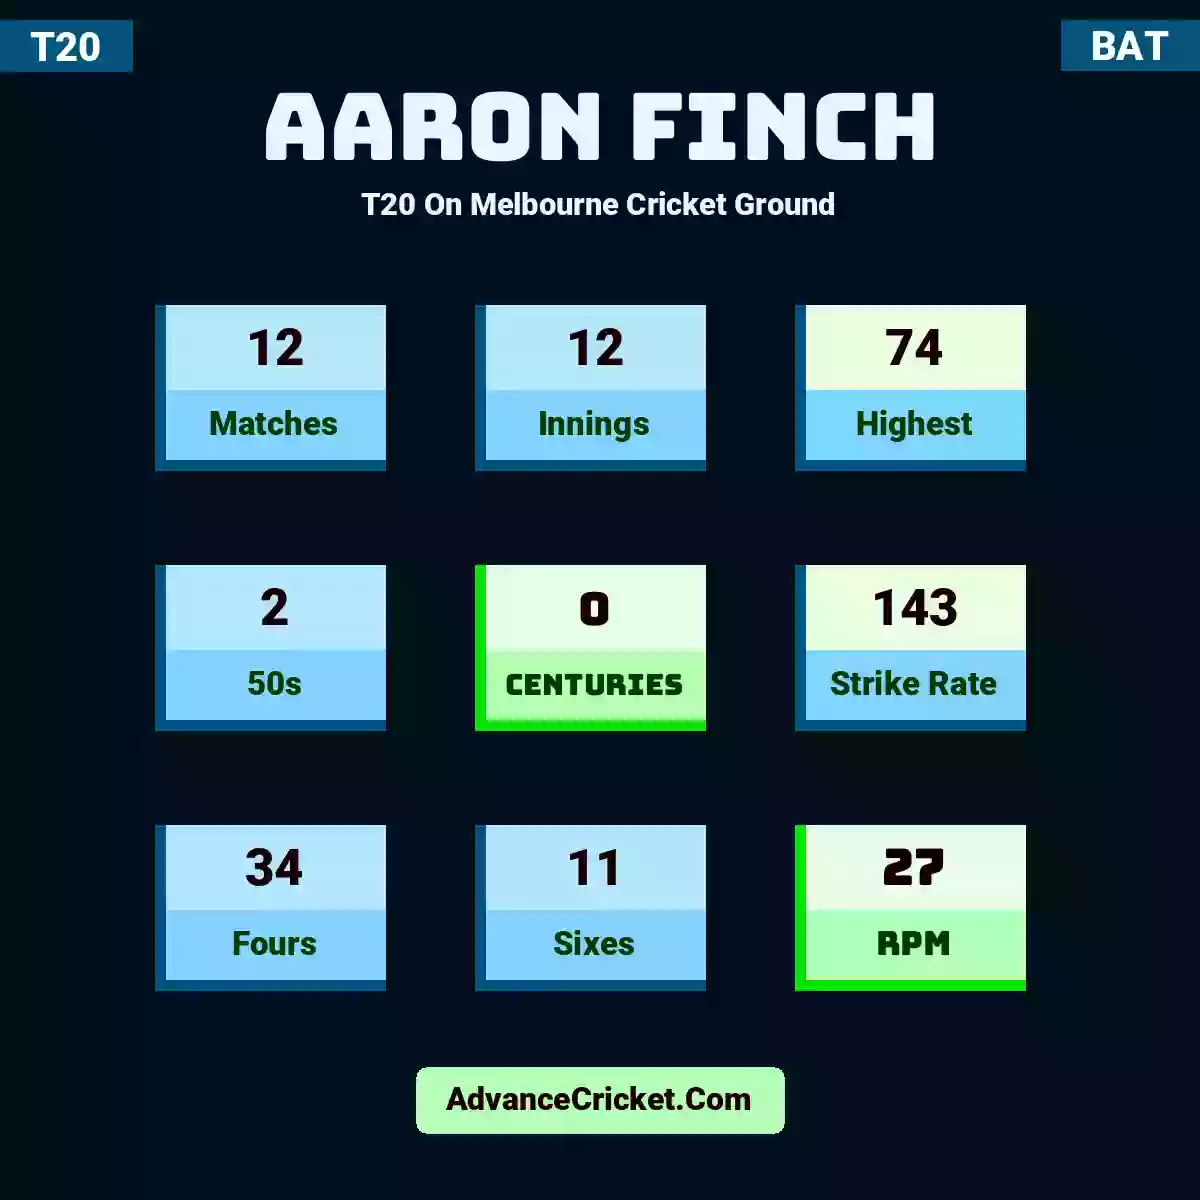 Aaron Finch T20  On Melbourne Cricket Ground, Aaron Finch played 12 matches, scored 74 runs as highest, 2 half-centuries, and 0 centuries, with a strike rate of 143. A.Finch hit 34 fours and 11 sixes, with an RPM of 27.